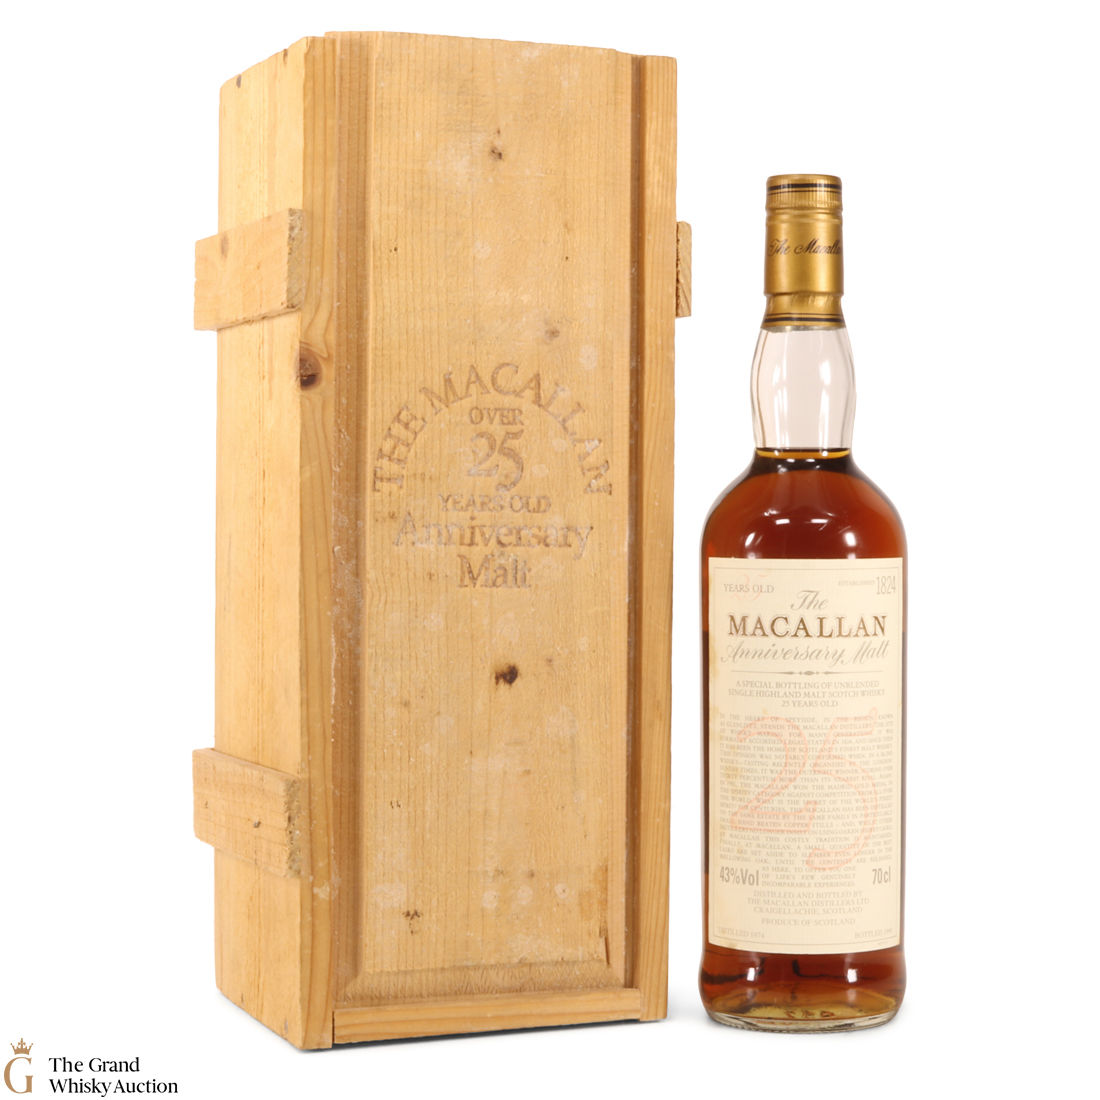 Macallan 25 Year Old Anniversary Malt 1974 Bottled 1999 Auction The Grand Whisky Auction